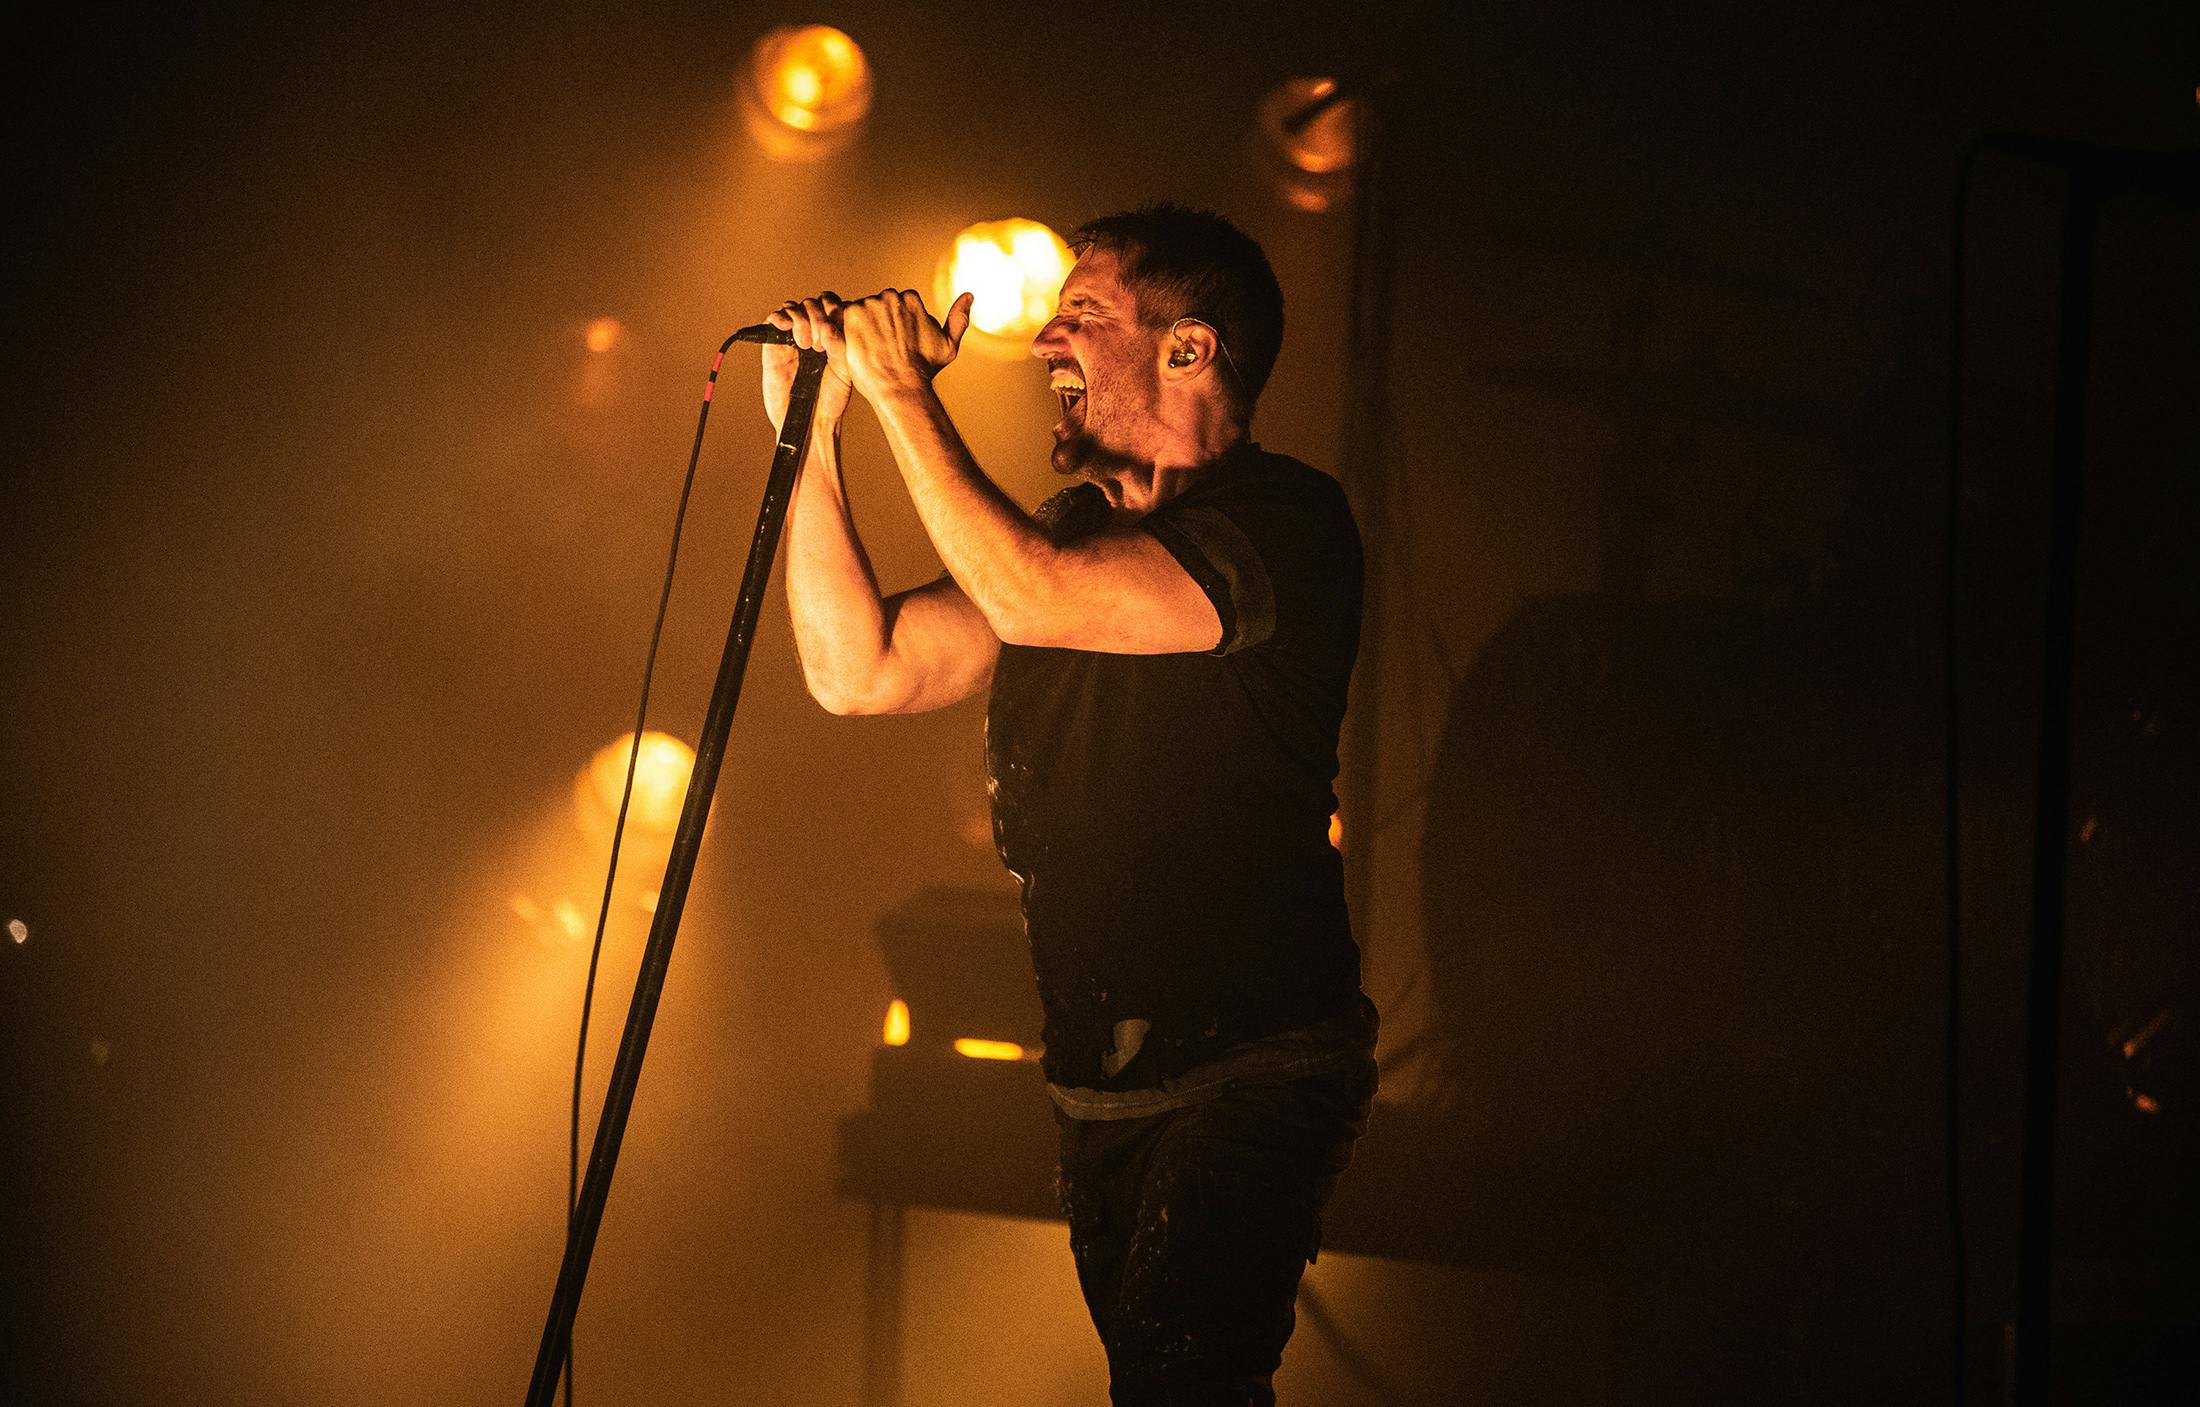 7 things we learned about Nine Inch Nails' Hurt from Netflix's Song Exploder